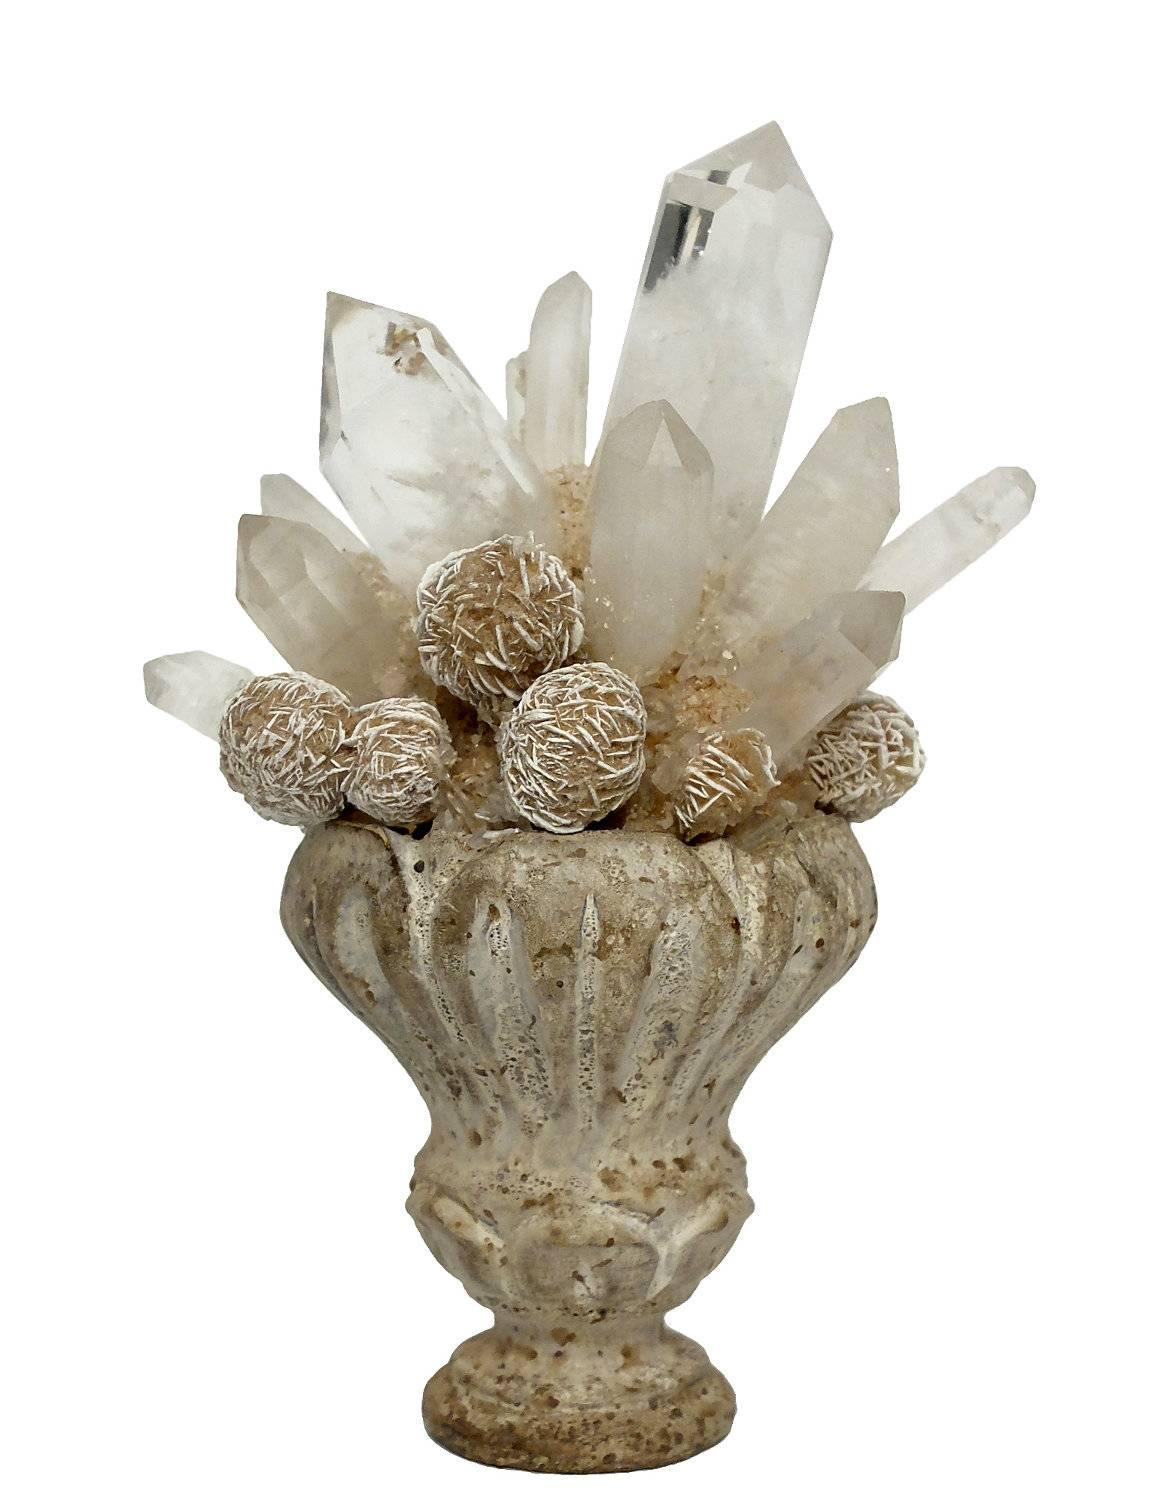 A Naturalia mineral specimen a pair of little Mexican desert rose crystals and rock crystals druzes, mounted over white carved wooden bases.